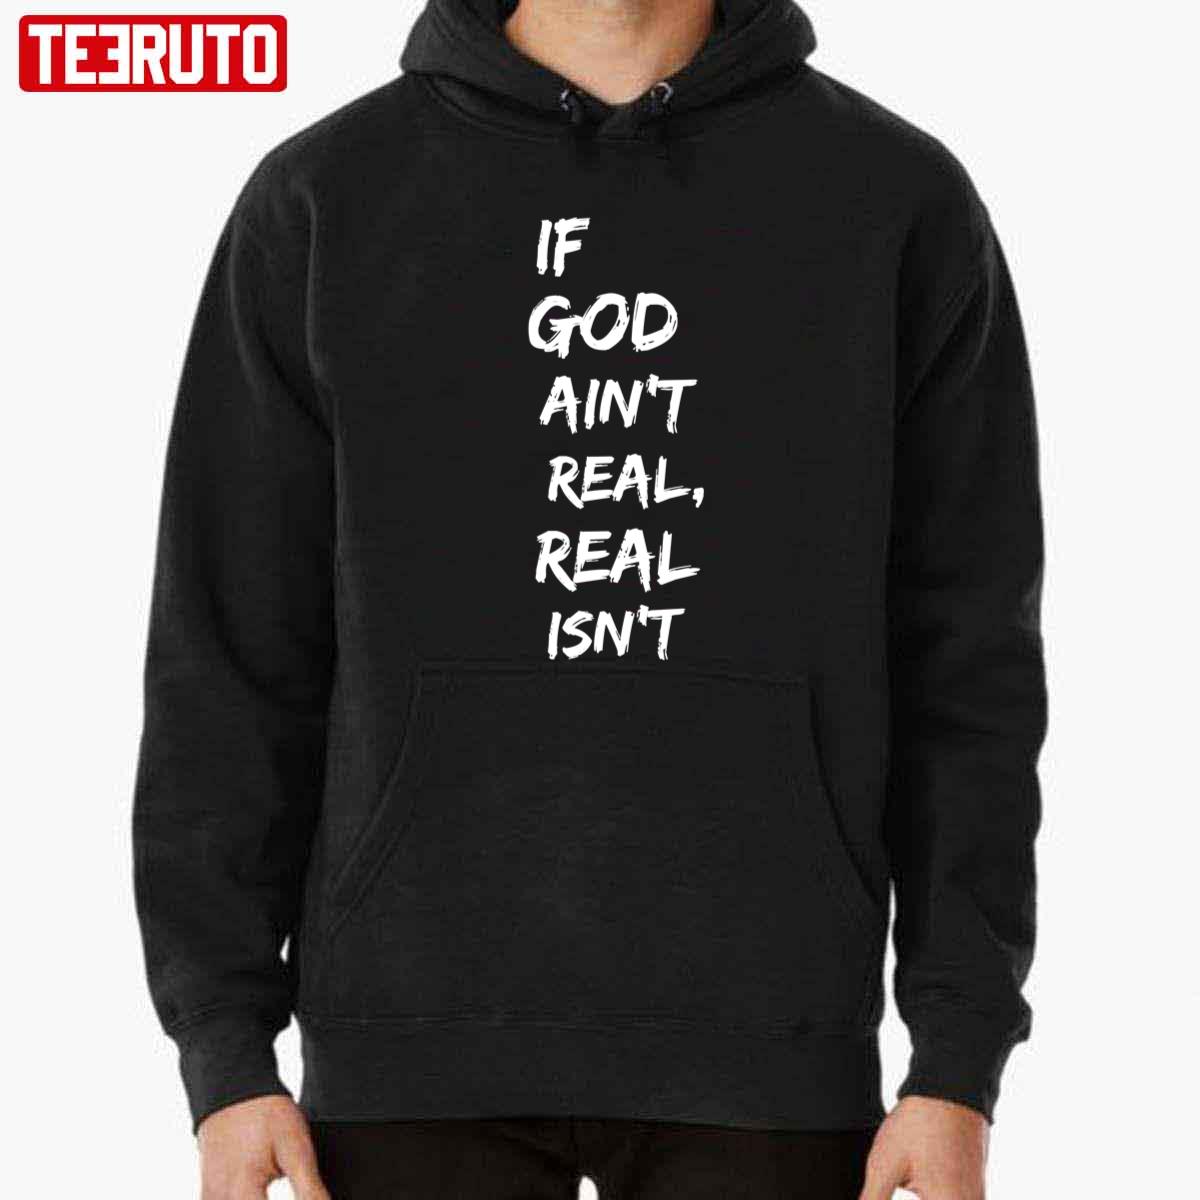 If God Ain't Real NF Rapper Real Music Unisex T-Shirt - Teeruto